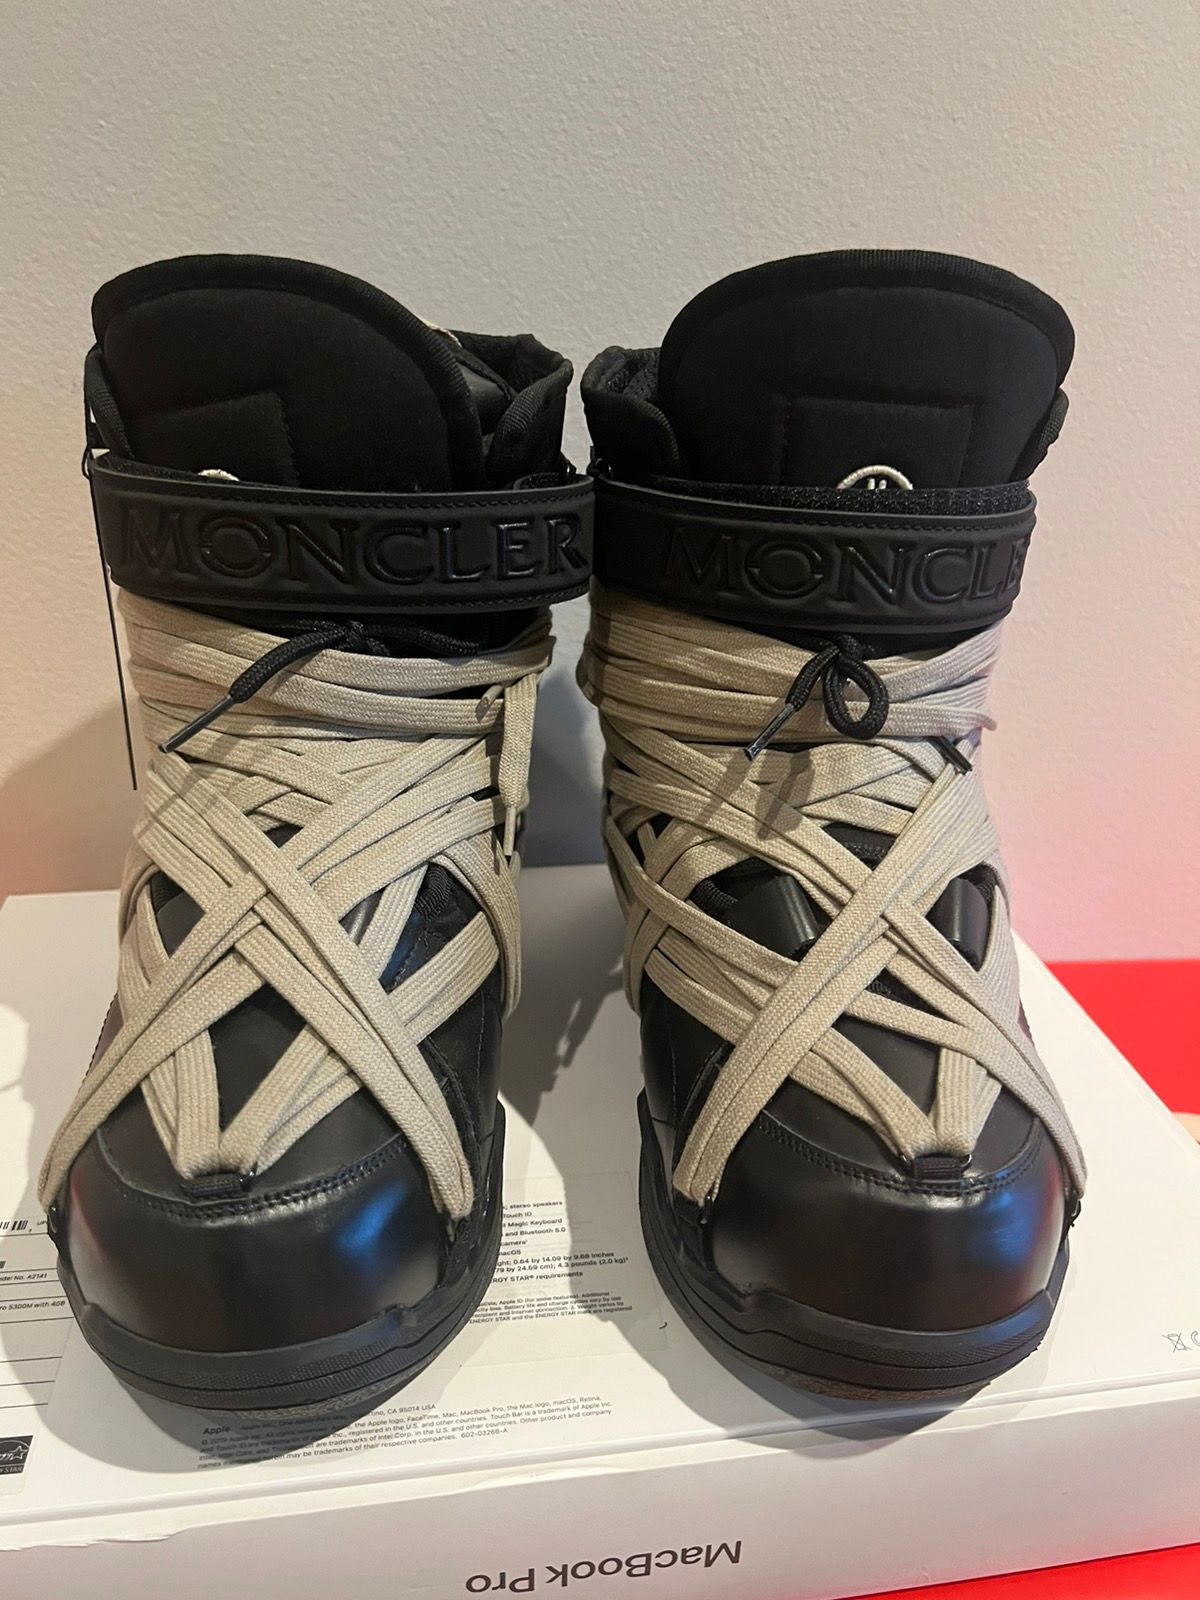 Rick Owens Moncler Megalace Amber Leather Snow Boots | Grailed